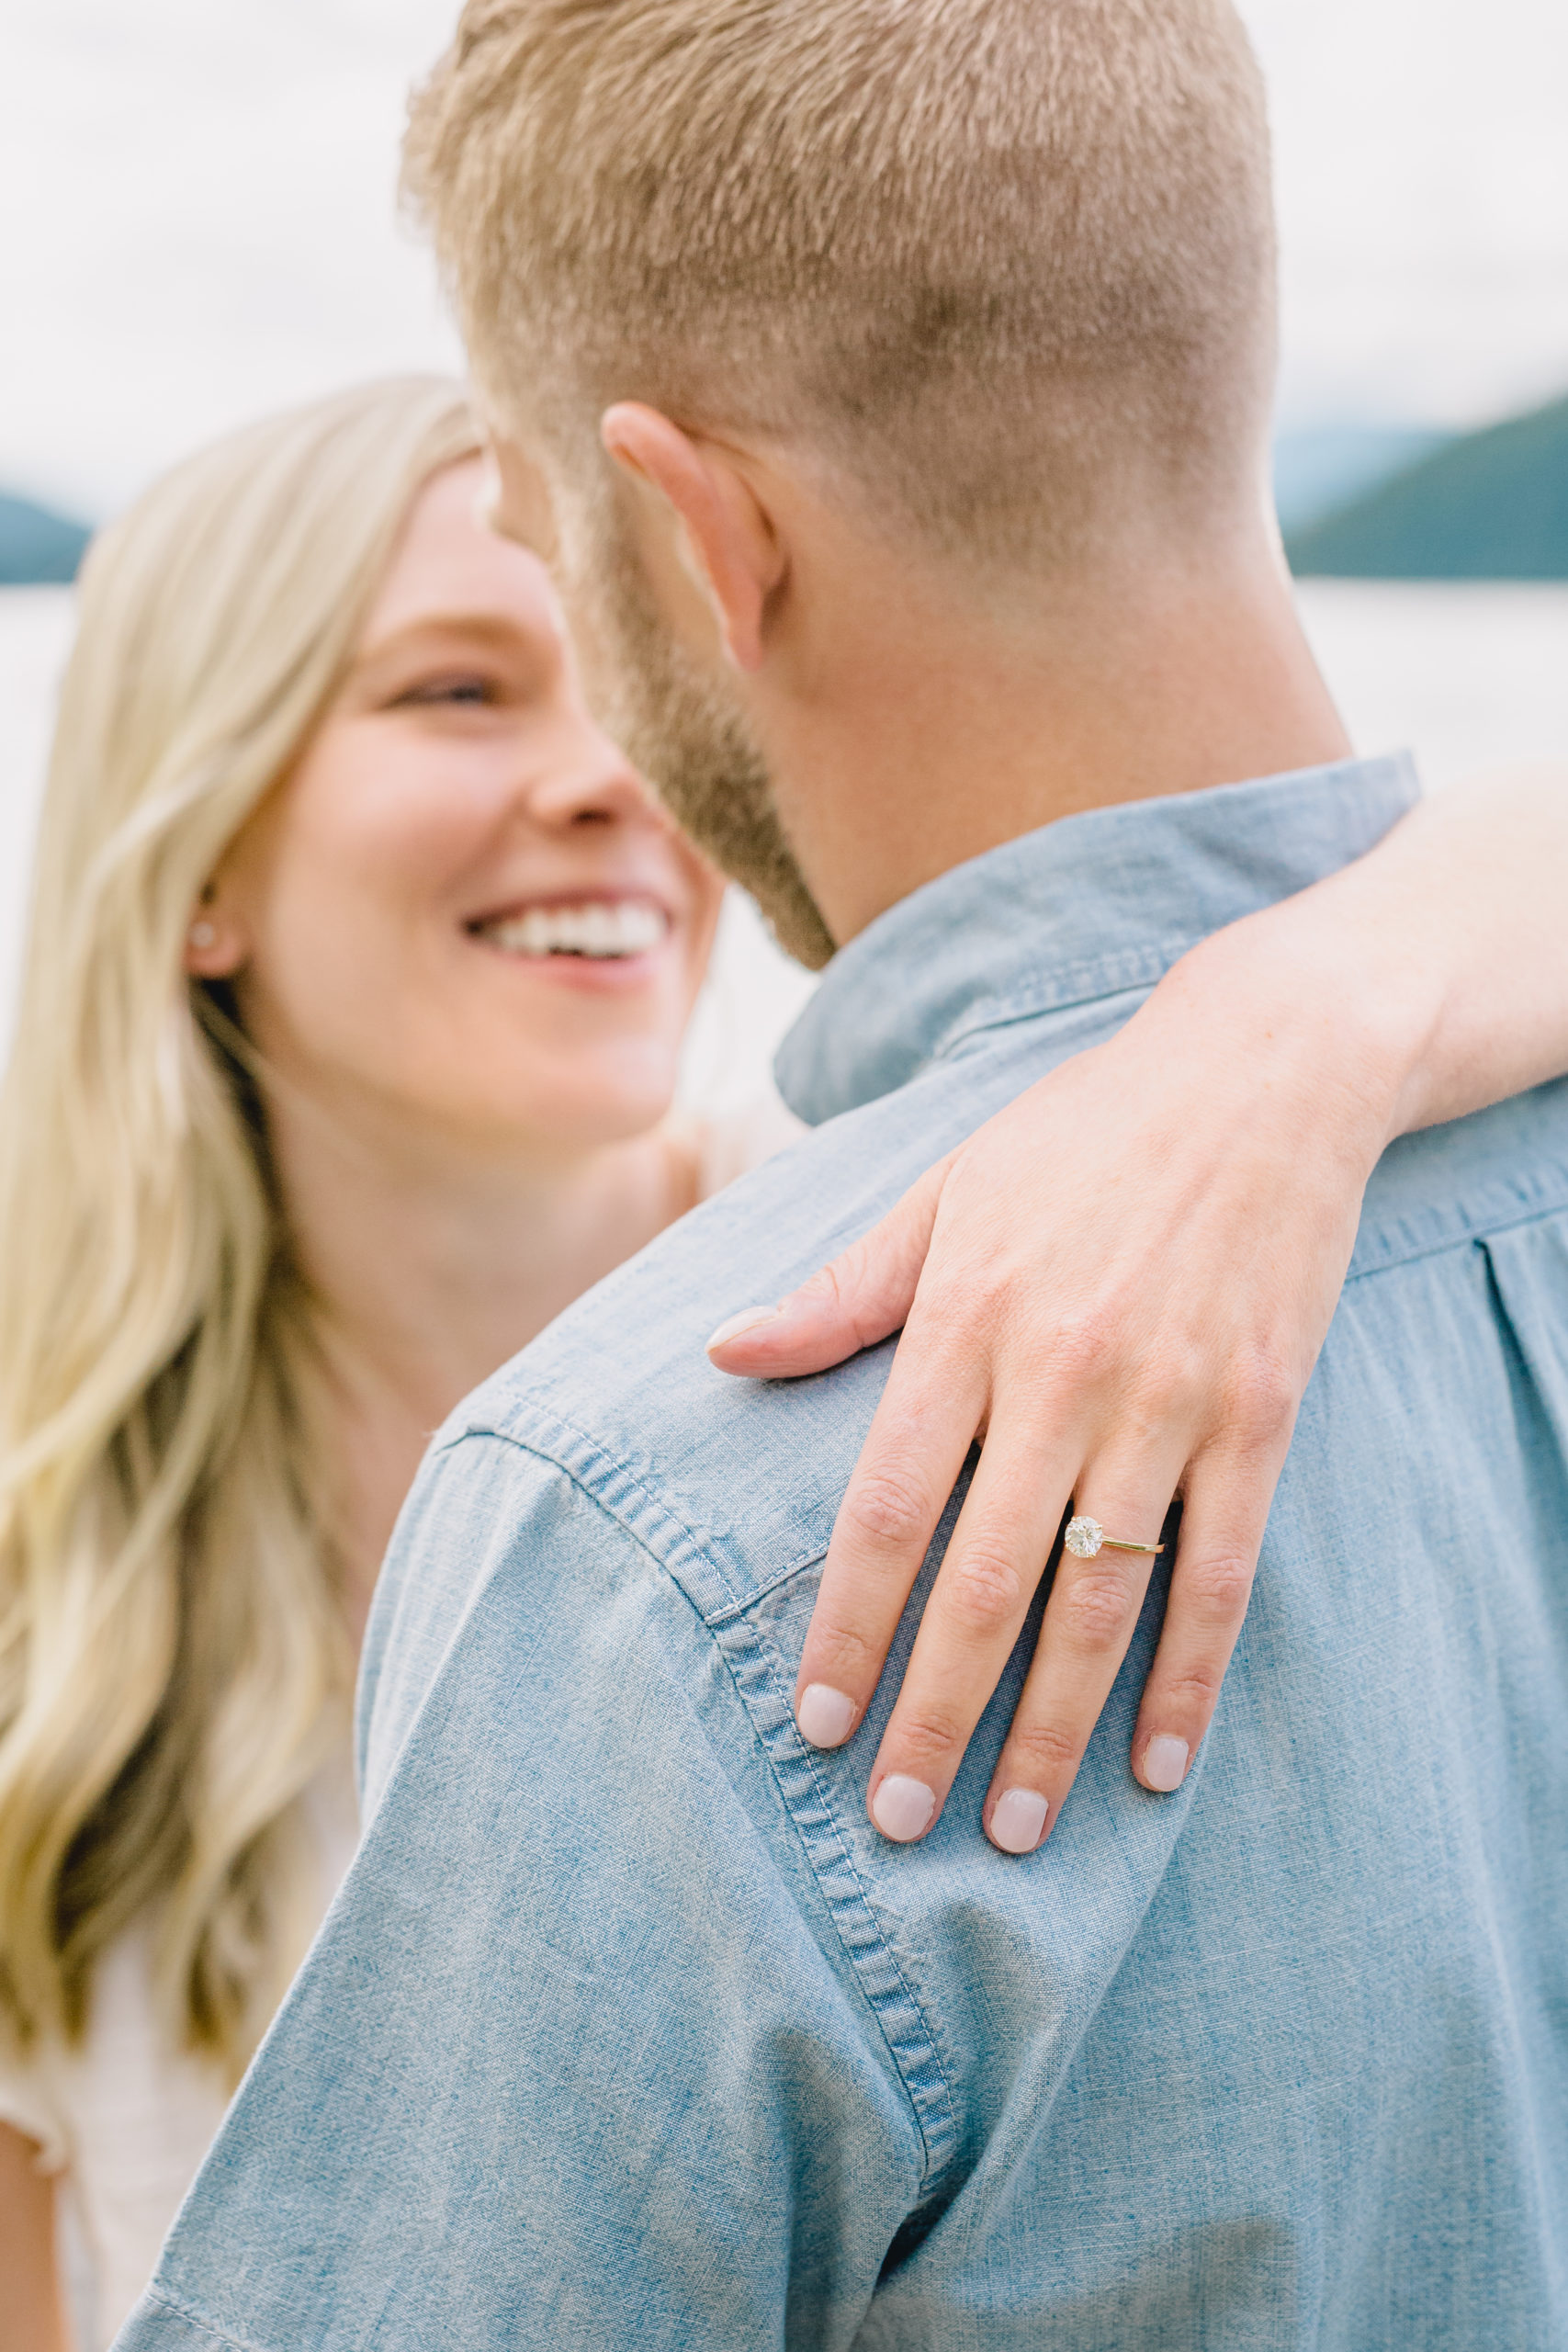 PNW Lake Cabin Engagement Session by Something Minted Photography